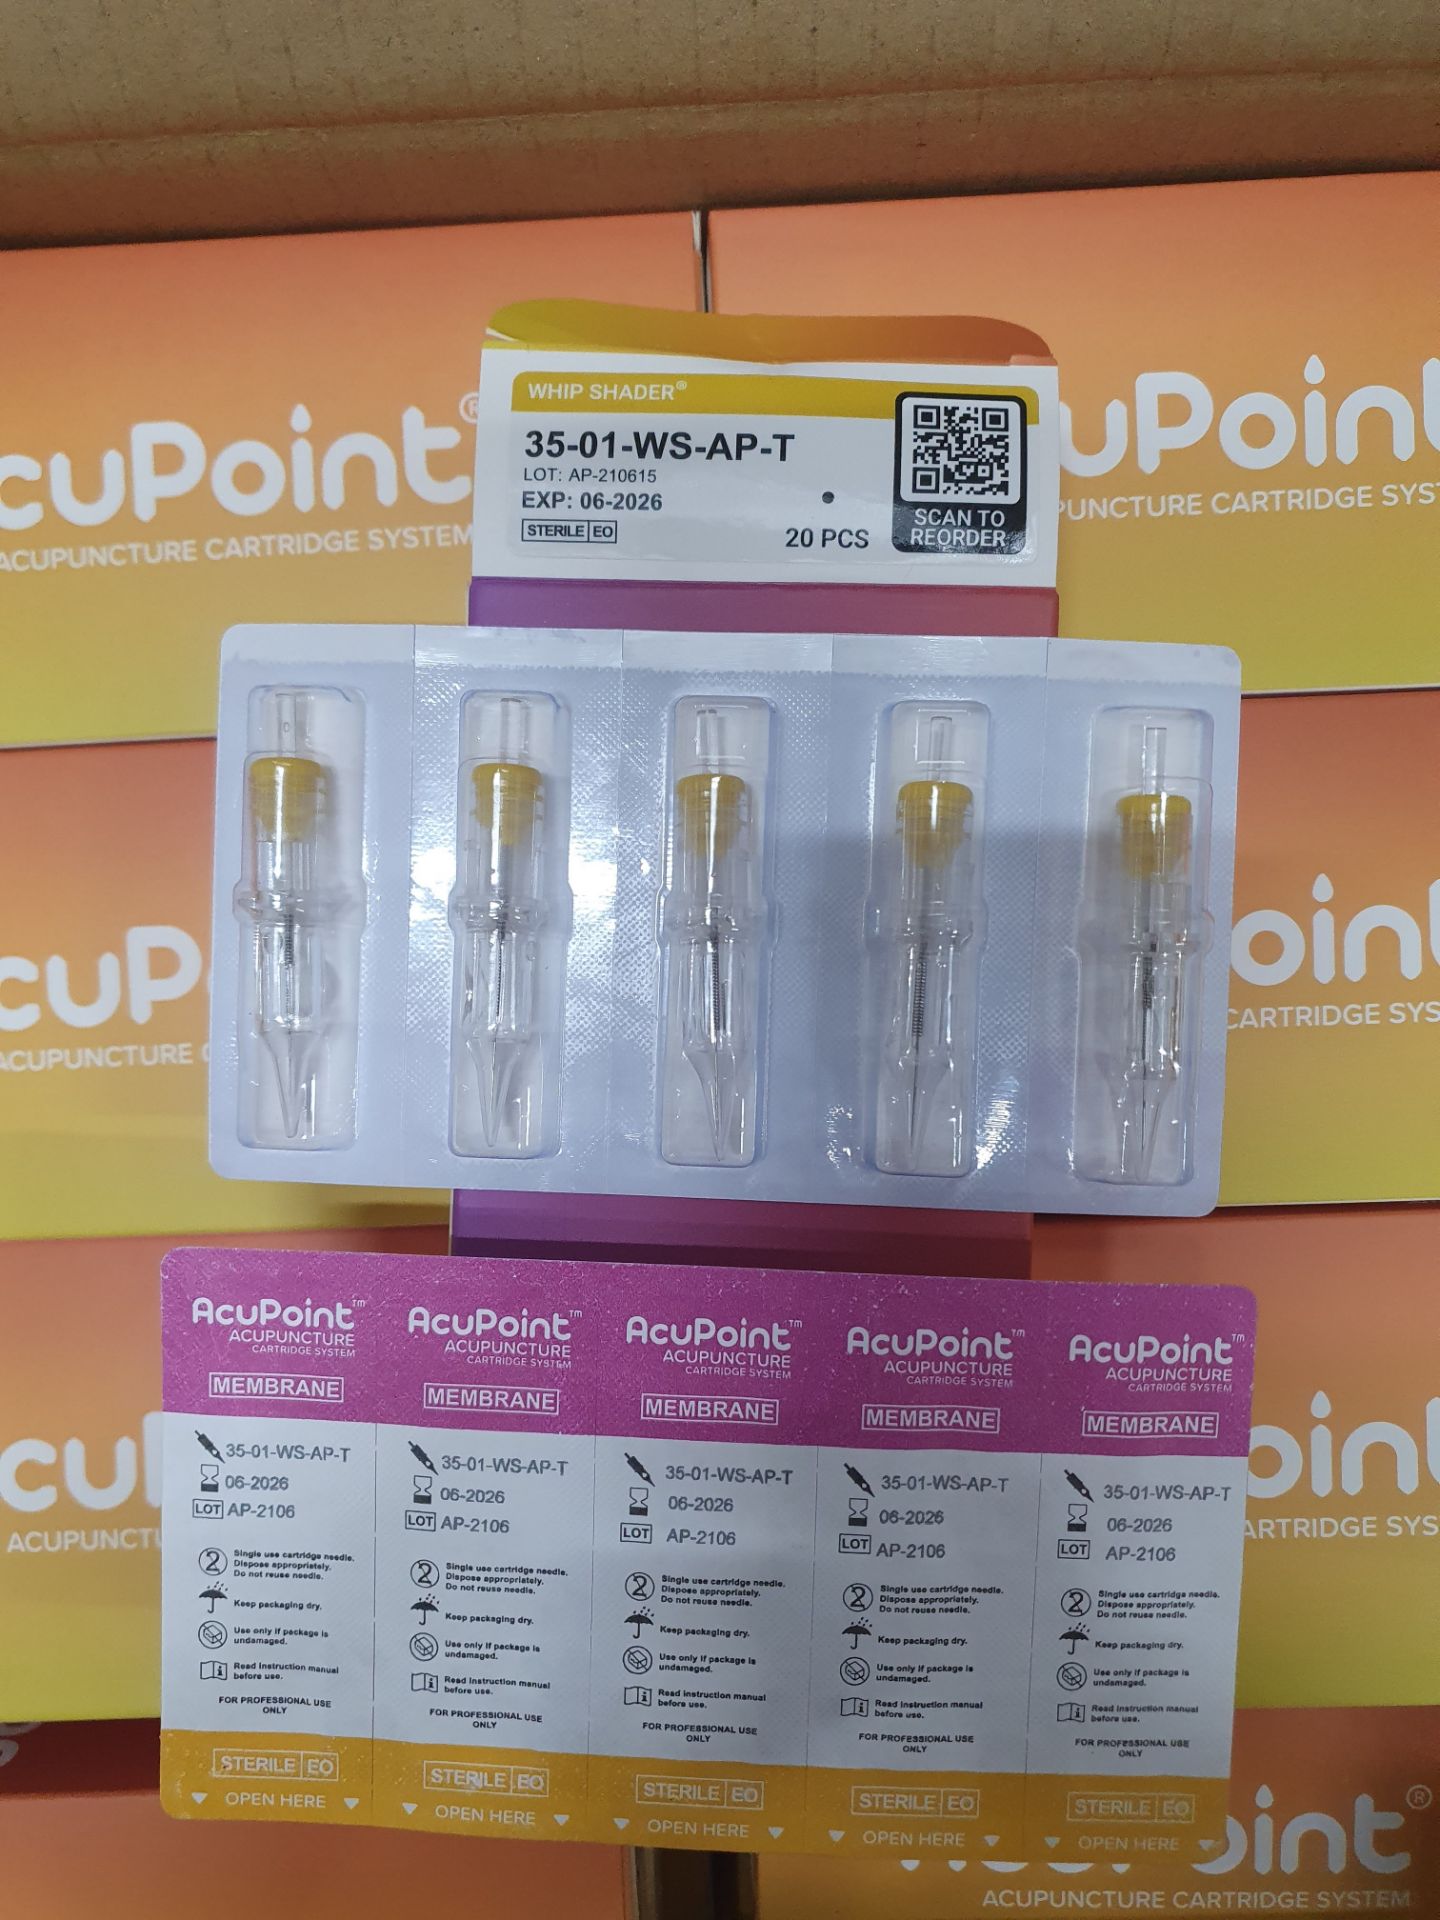 1,000 AcuPoint Accupuncture Cartridge System, Whip Shader exp 03&06/26 - Image 4 of 4